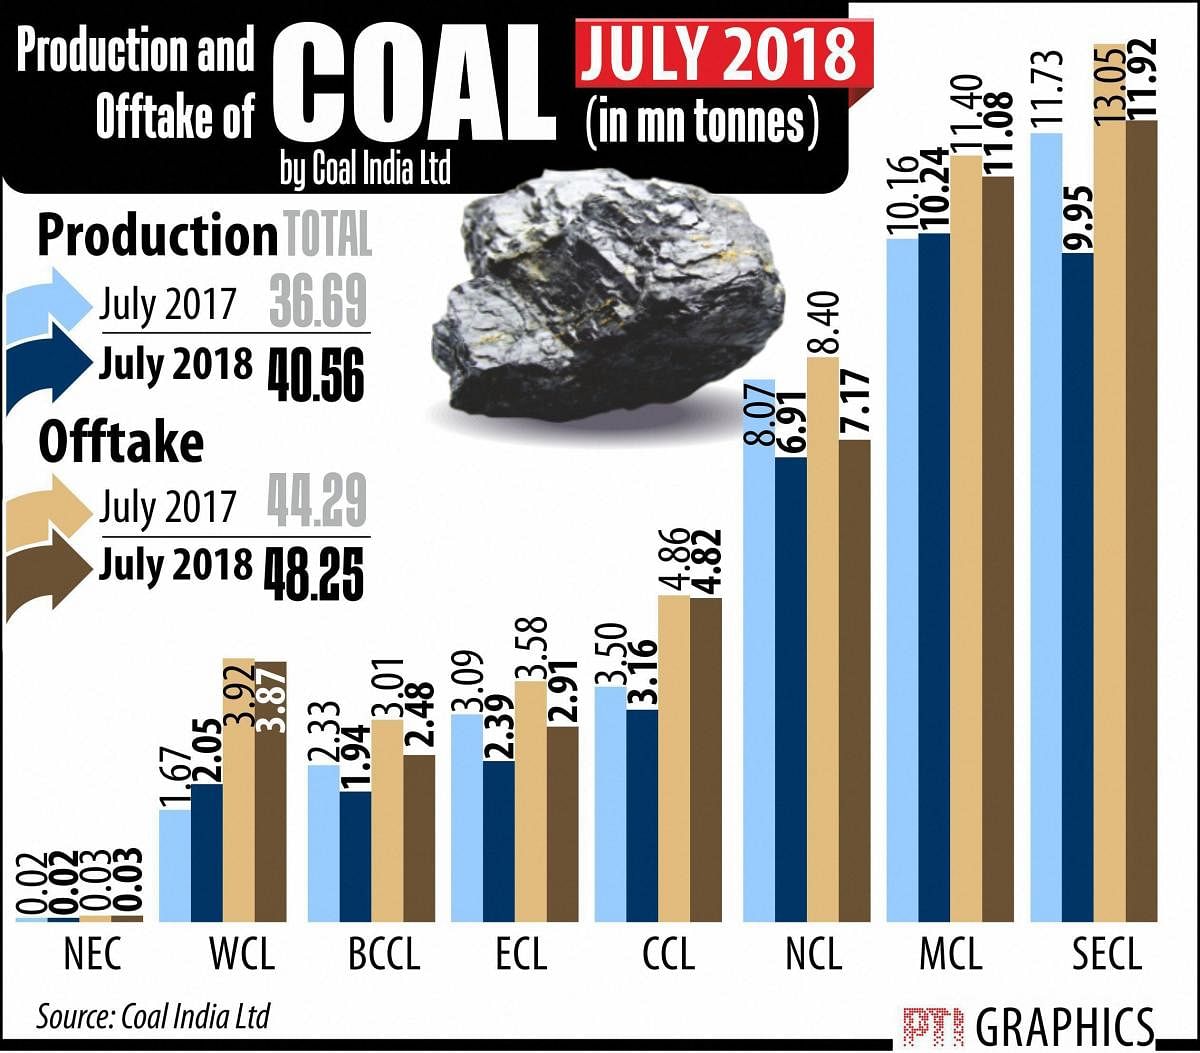 CIL had reported a net profit of Rs 2,350.78 crore in the same quarter of 2017-18.